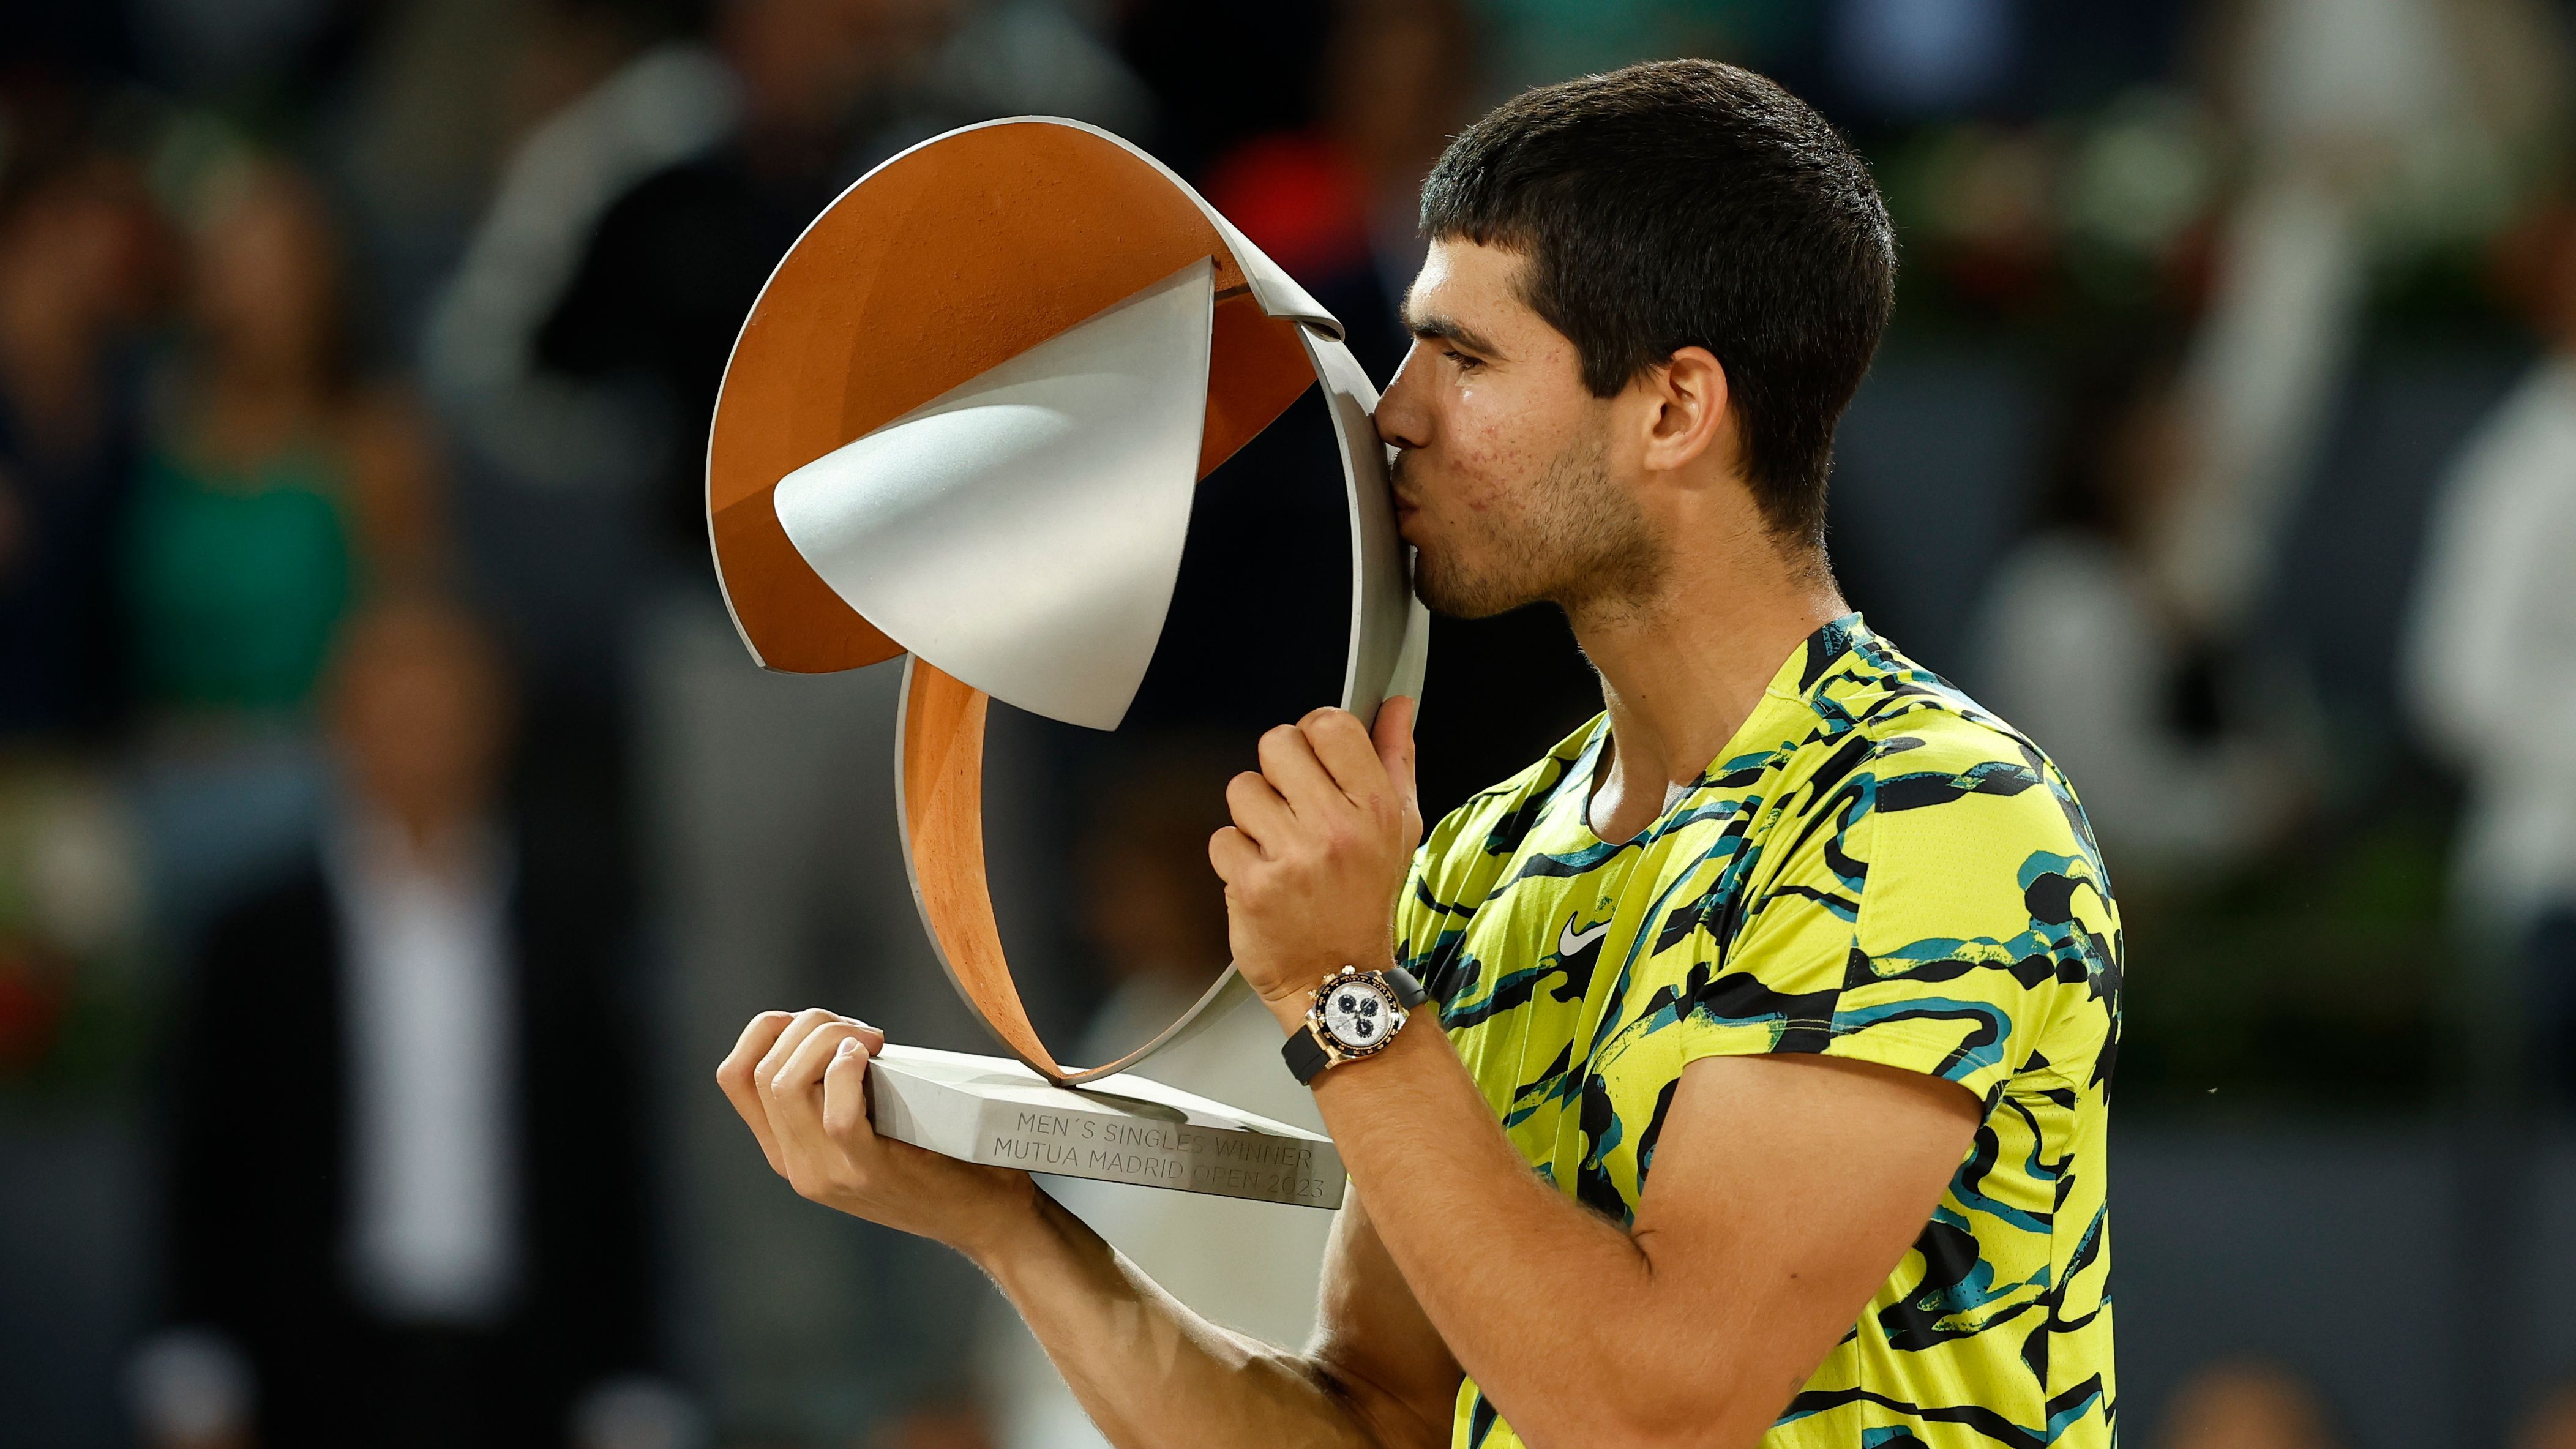 Alcaraz repeats the title at the Mutua Madrid Open after a tough final with Struff